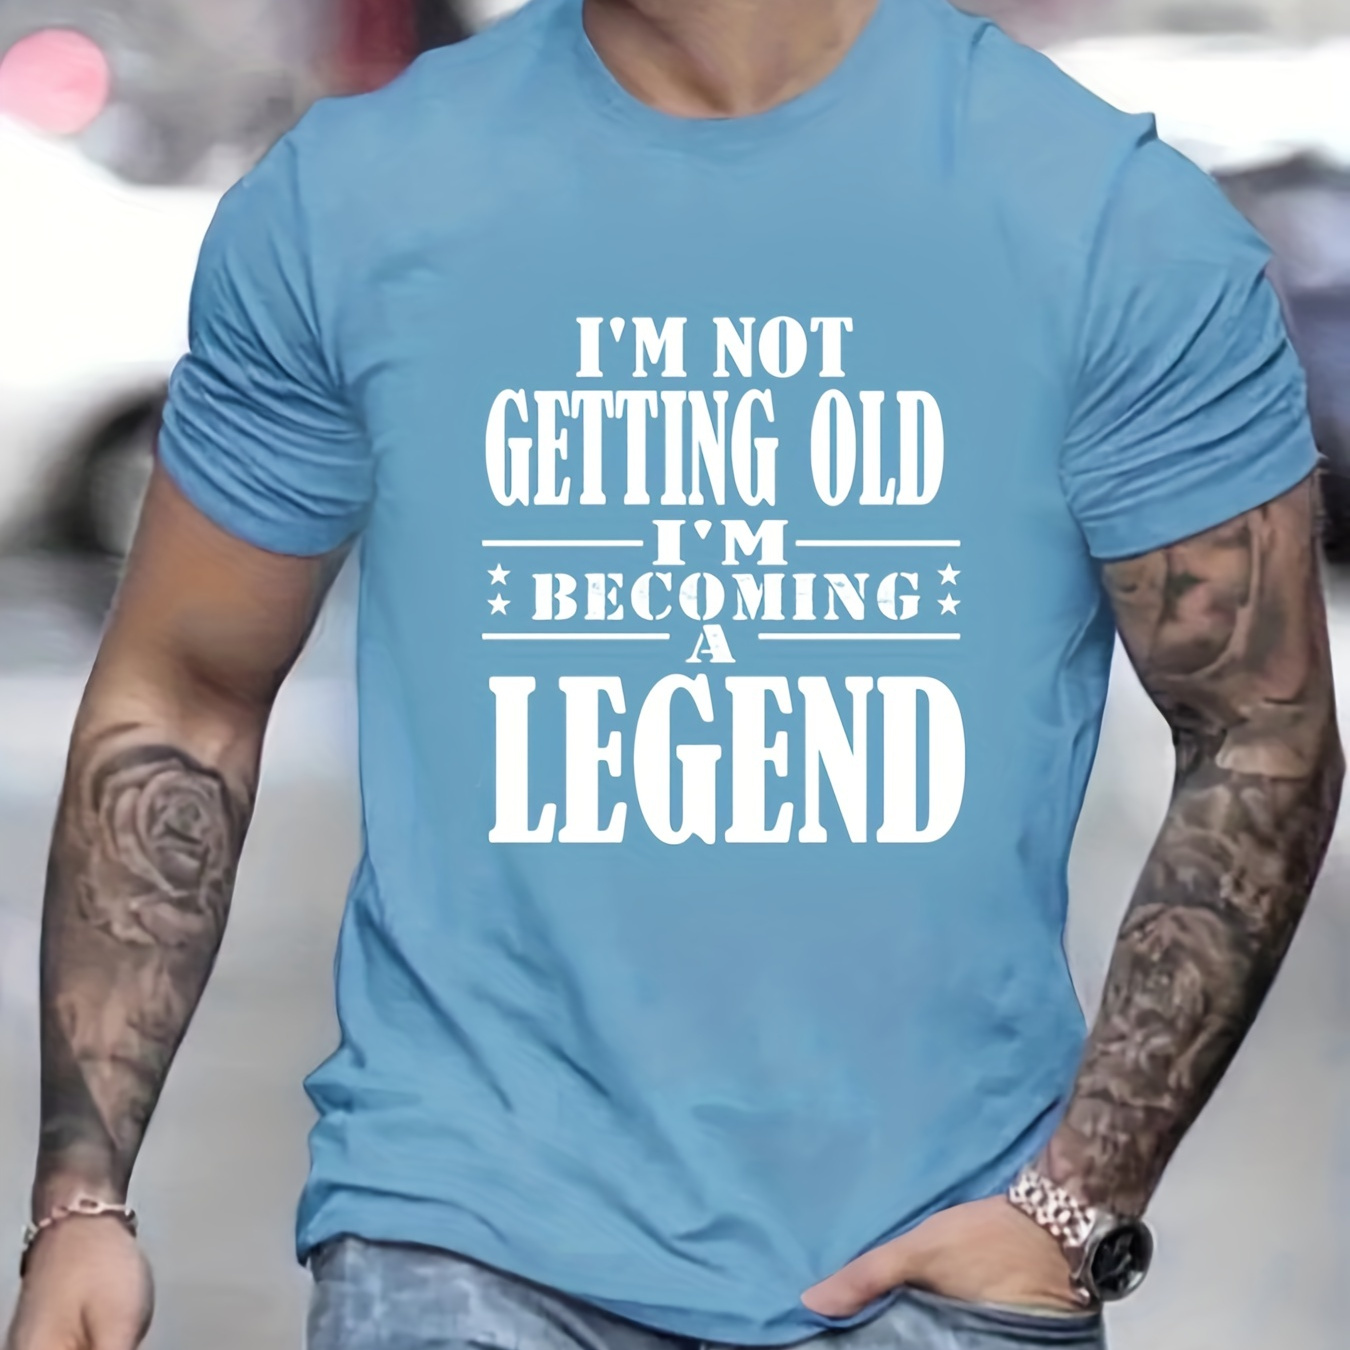 

I'm Not Getting Old I'm Becoming A Legend Letter Graphic Print Men's Creative Top, Casual Short Sleeve Crew Neck T-shirt, Men's Tee For Summer Outdoor